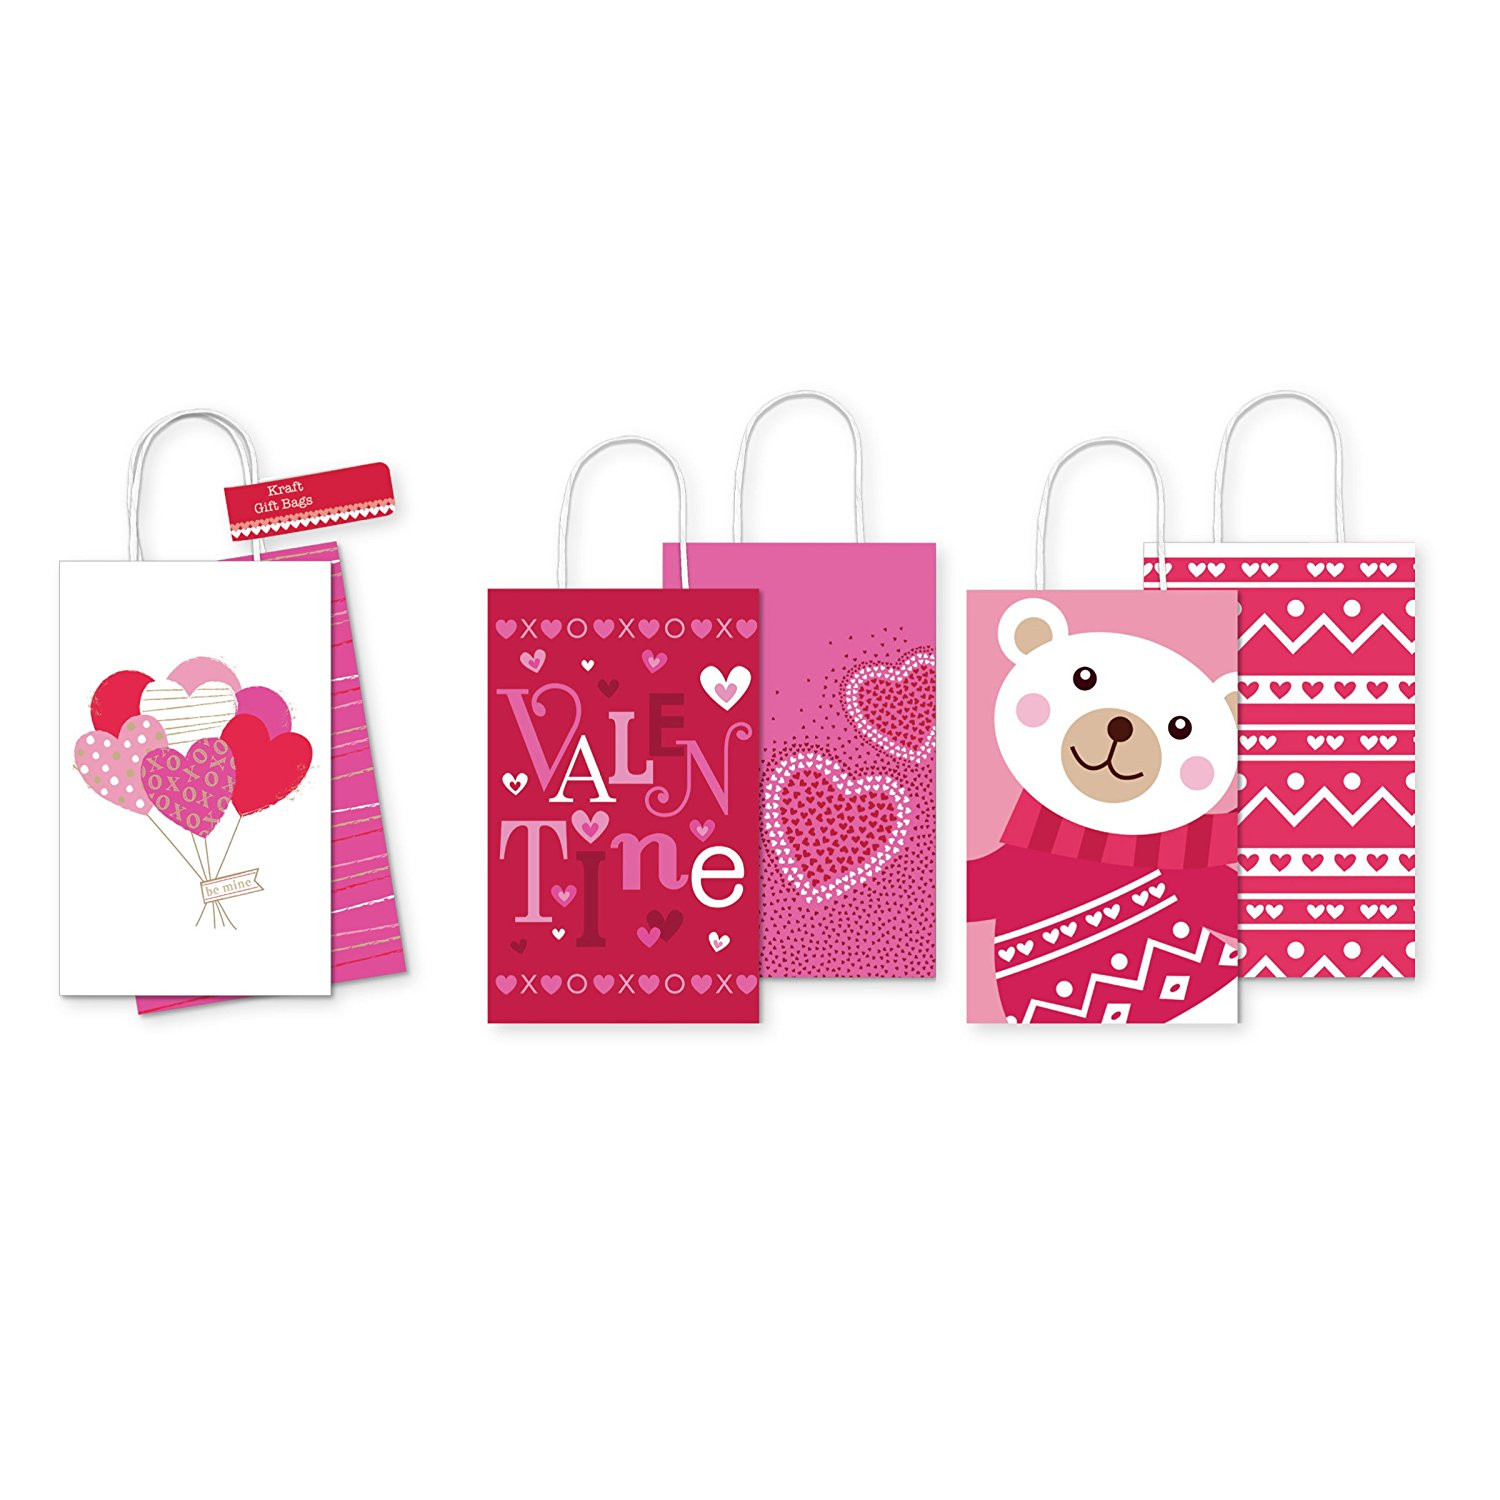 Valentines Day Gift Bags
 Pack of 6 Small Kraft Valentine s Day Gift Bags Perfect